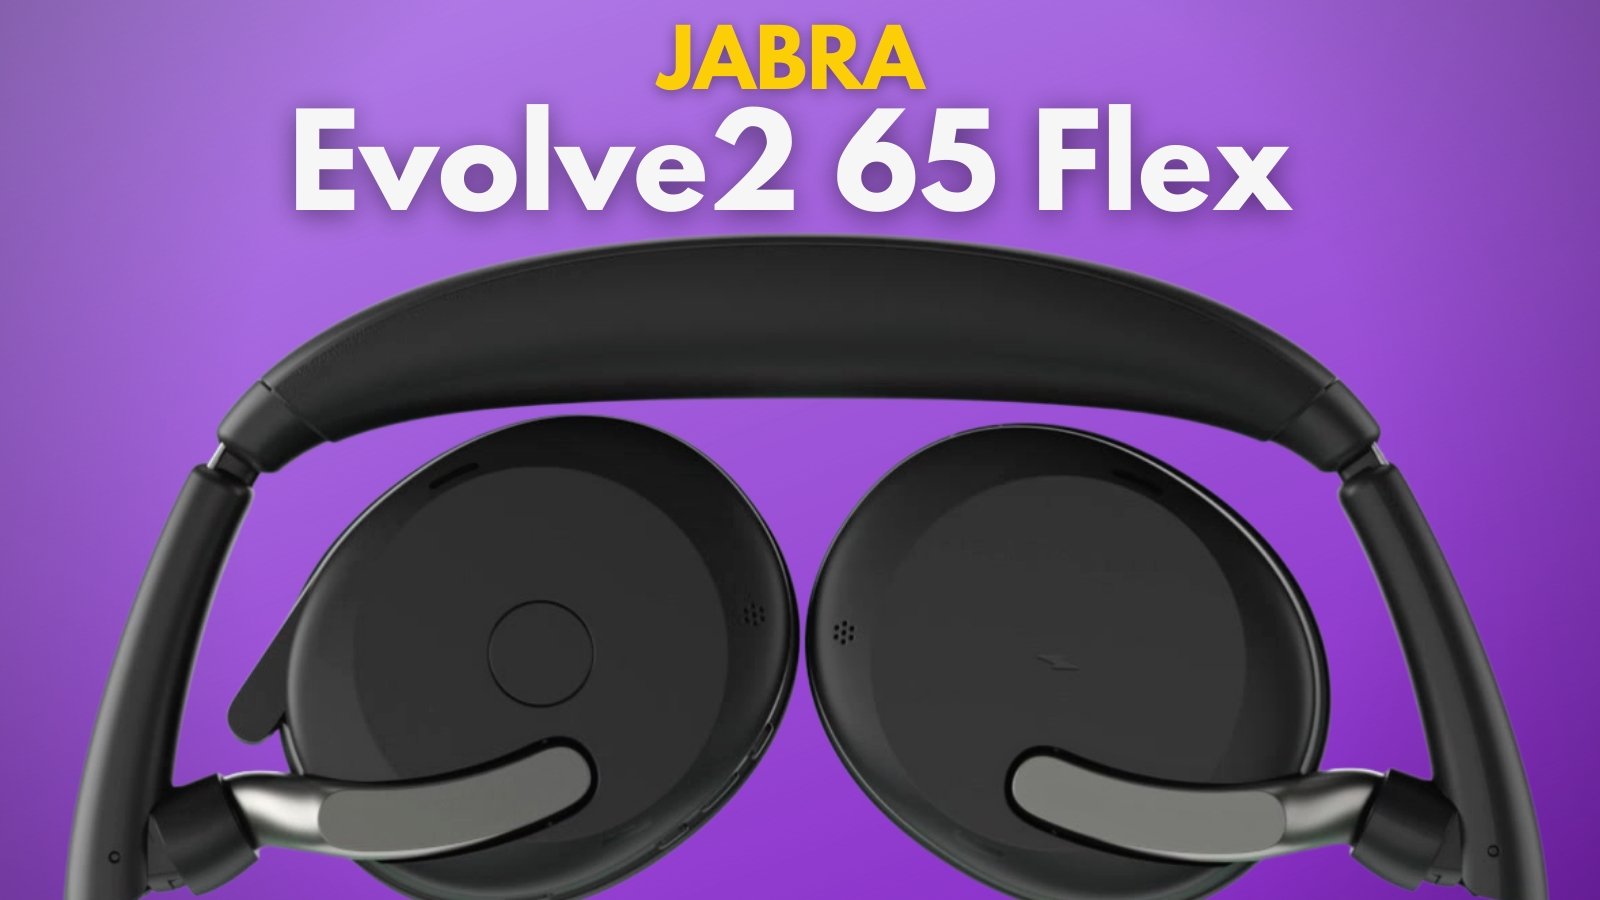 The Ultimate Headset For Remote, and Jabra Workers: Evolve2 65 Hybrid